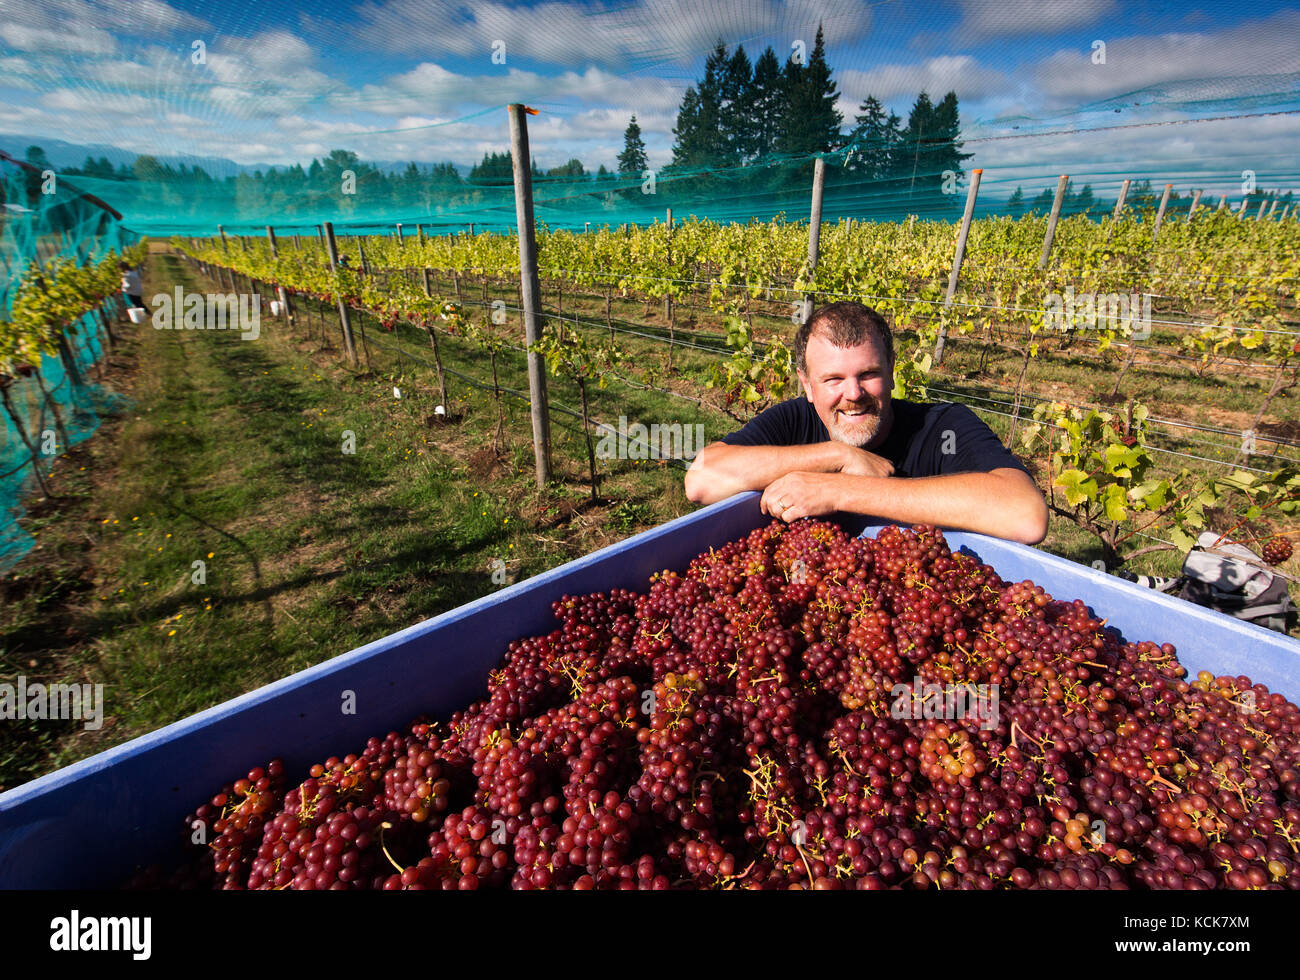 A smiling worker oversees the collection of ripened Ortega Grapes, harvested at Beaufort Vineyard and Estate Winery.  Courtenay, Vancouver Island, British Columbia, Canada. Stock Photo